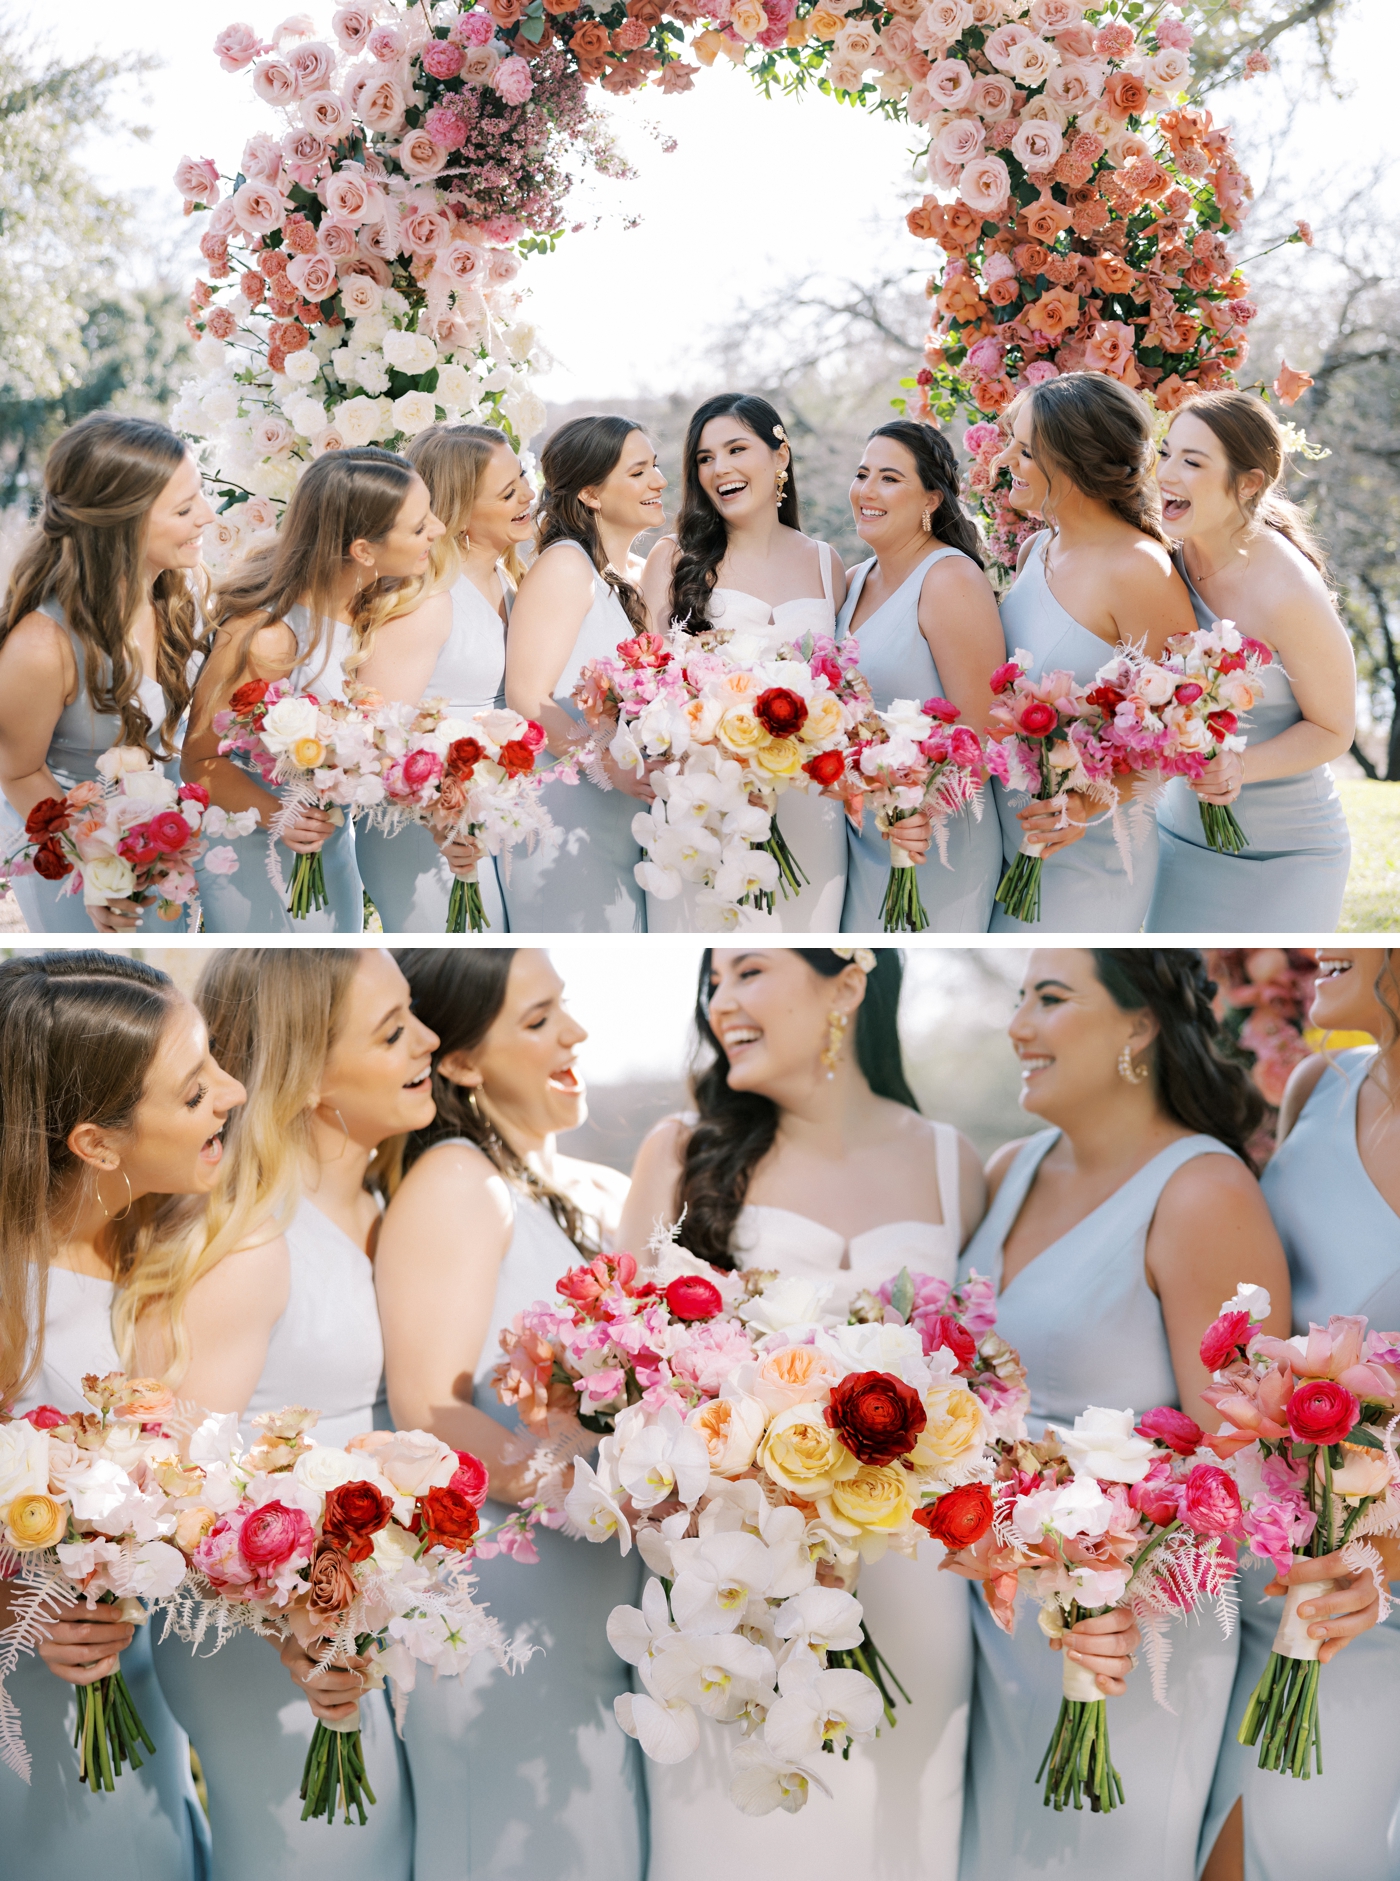 Colorful bridesmaids bouquets in shades of blush, red, orange, yellow and pink